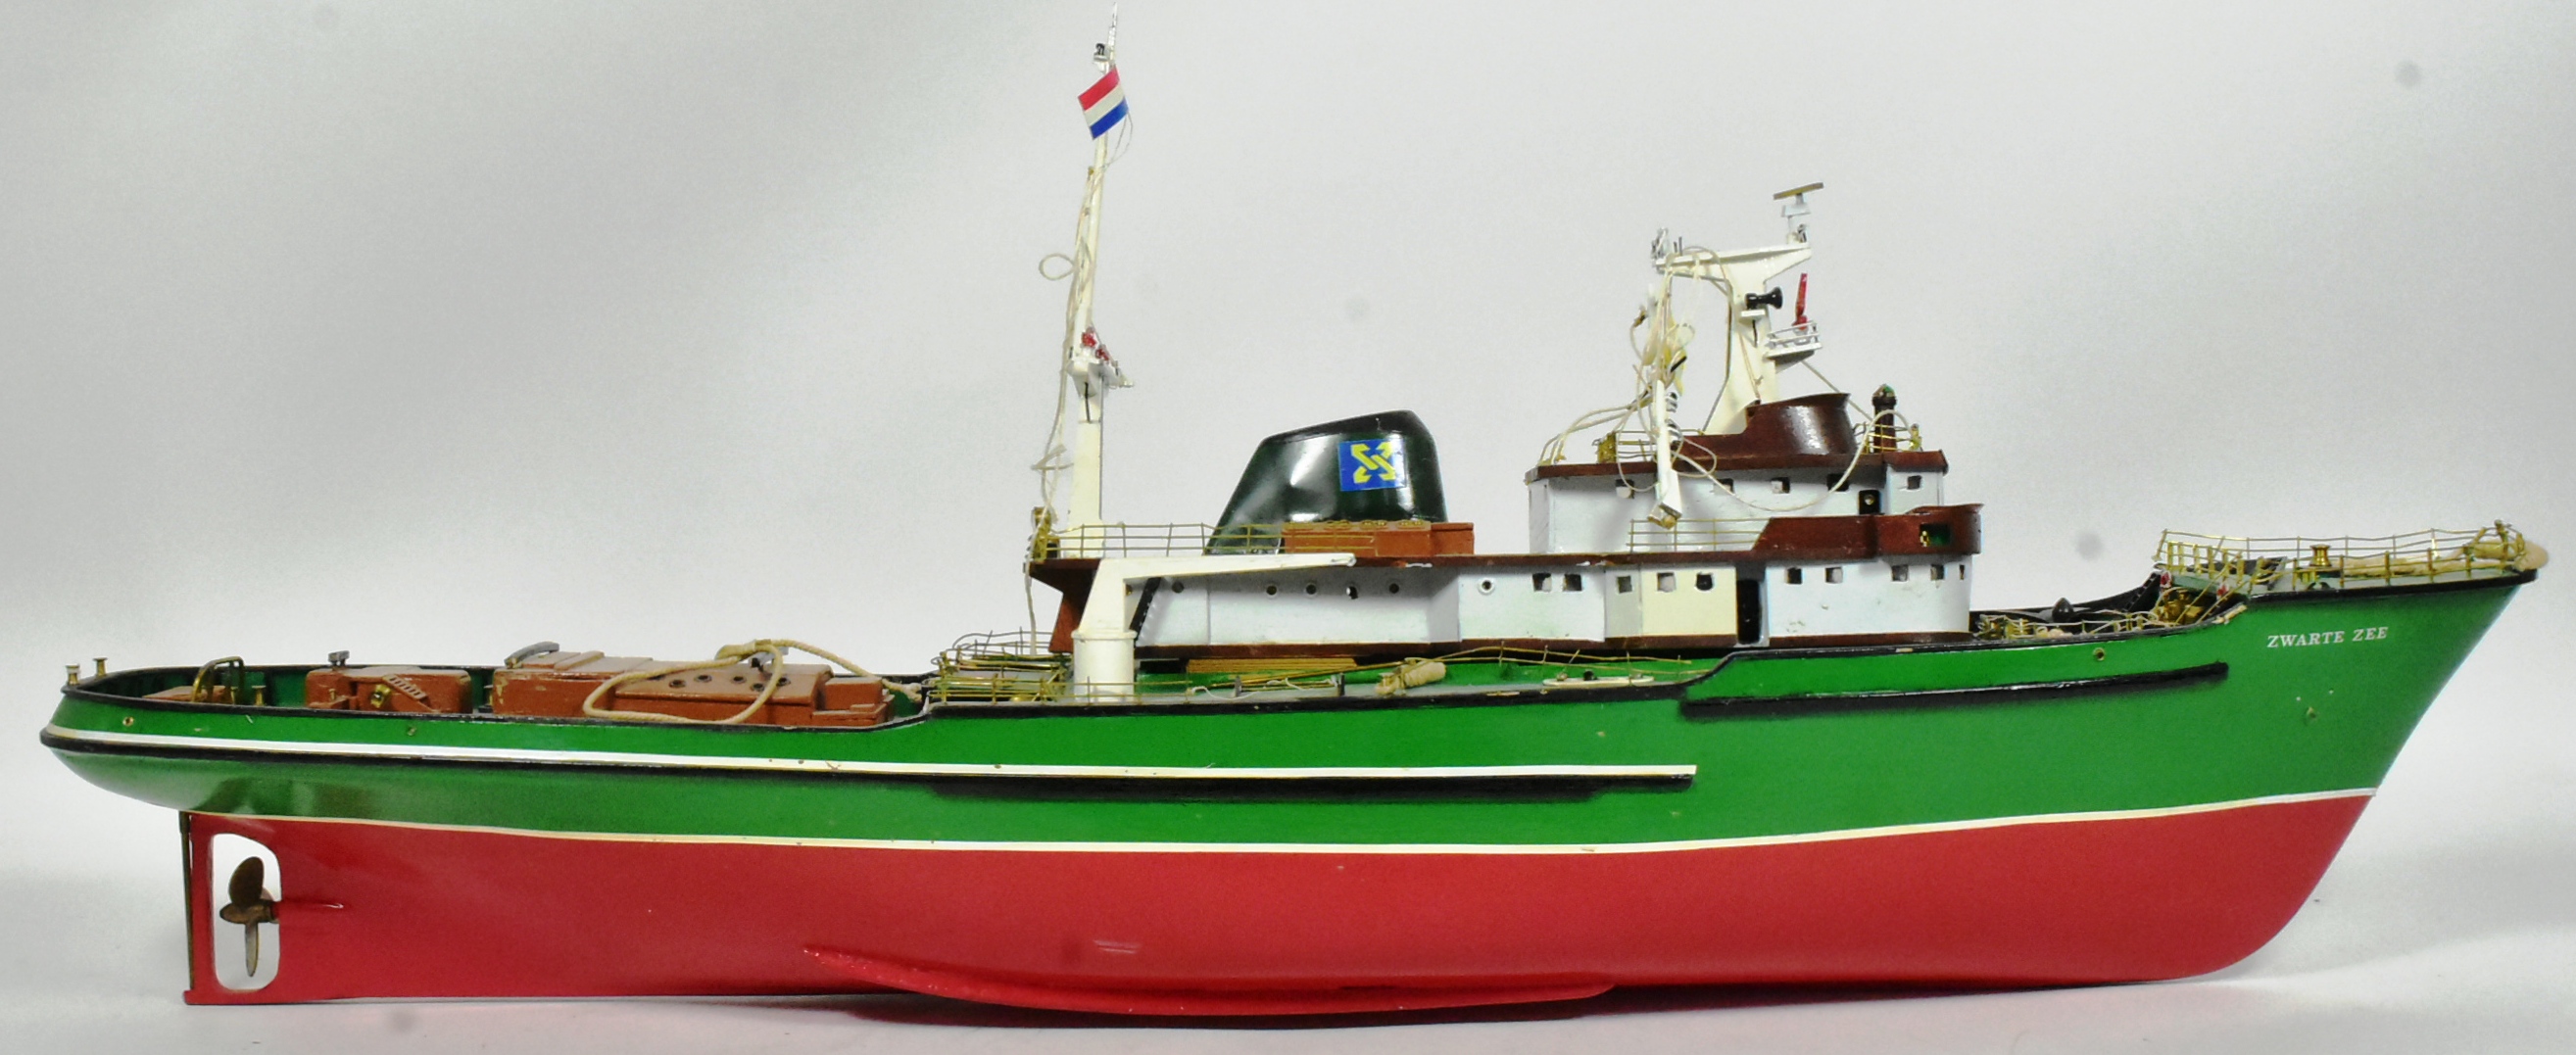 RADIO CONTROLLED BOAT - VINTAGE HAND BUILD MODEL - Image 3 of 7